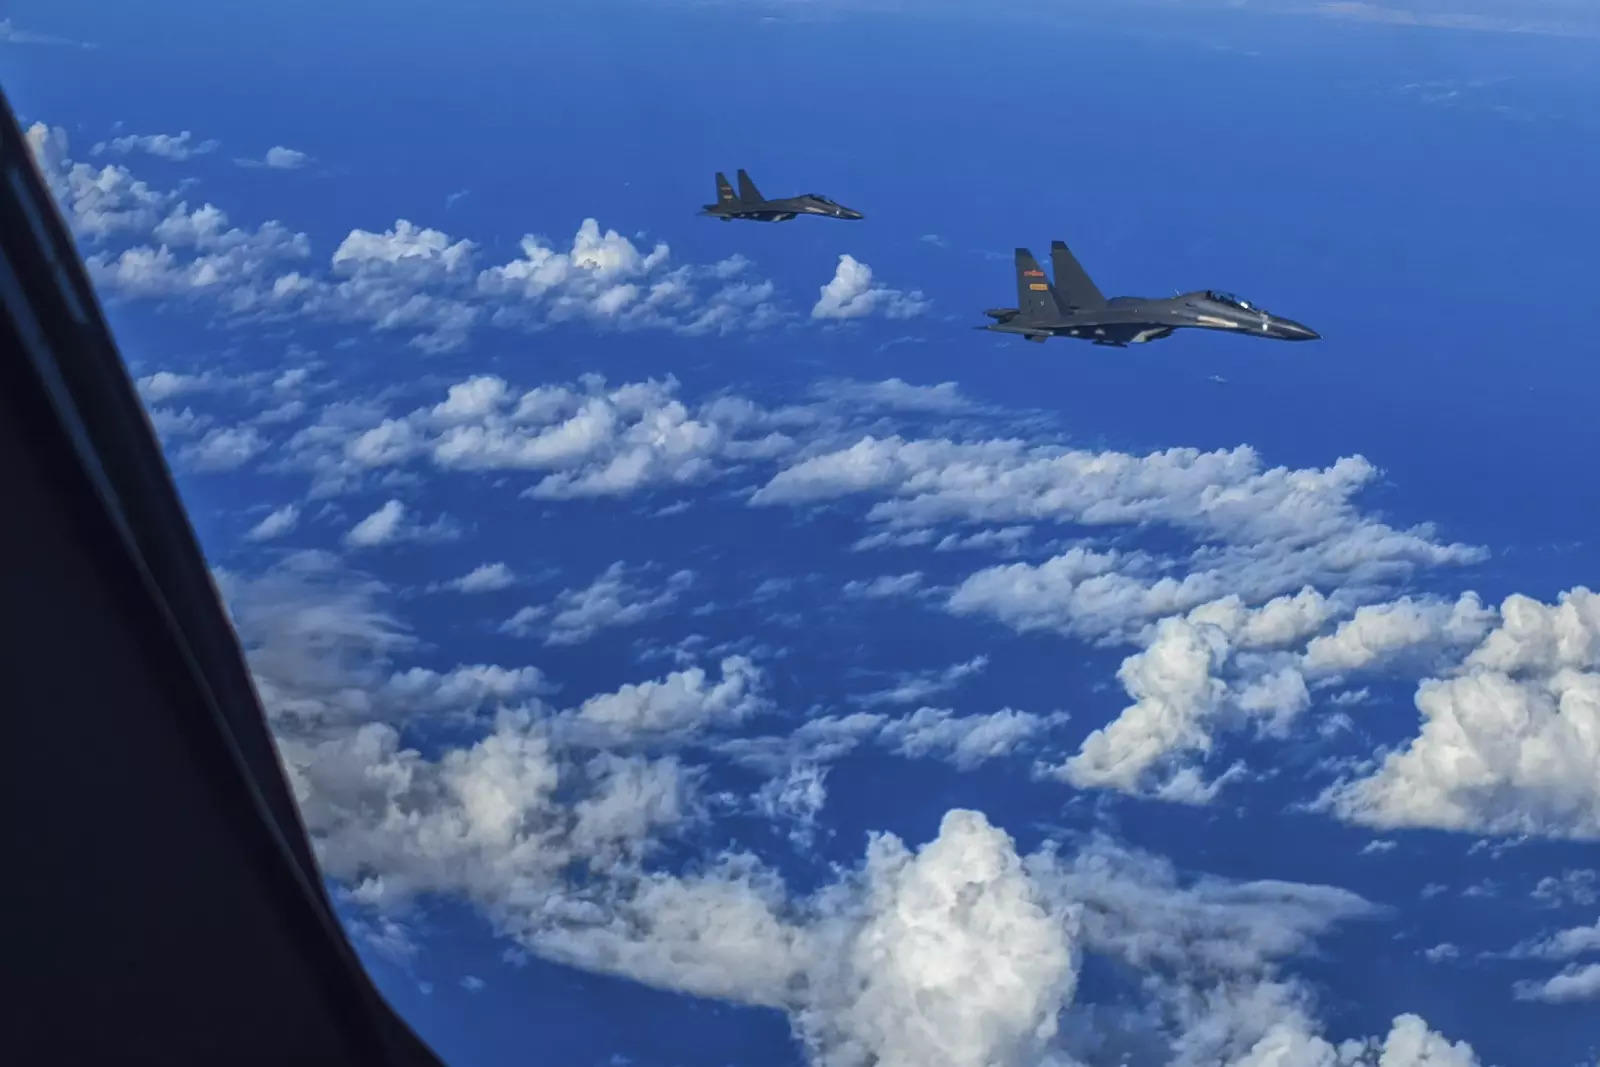 File photo: Taiwan on Monday reported the larges-ever Chinese air force incursion into the island's air defence identification zone, with 43 Chinese planes crossing an unofficial buffer between the two sides